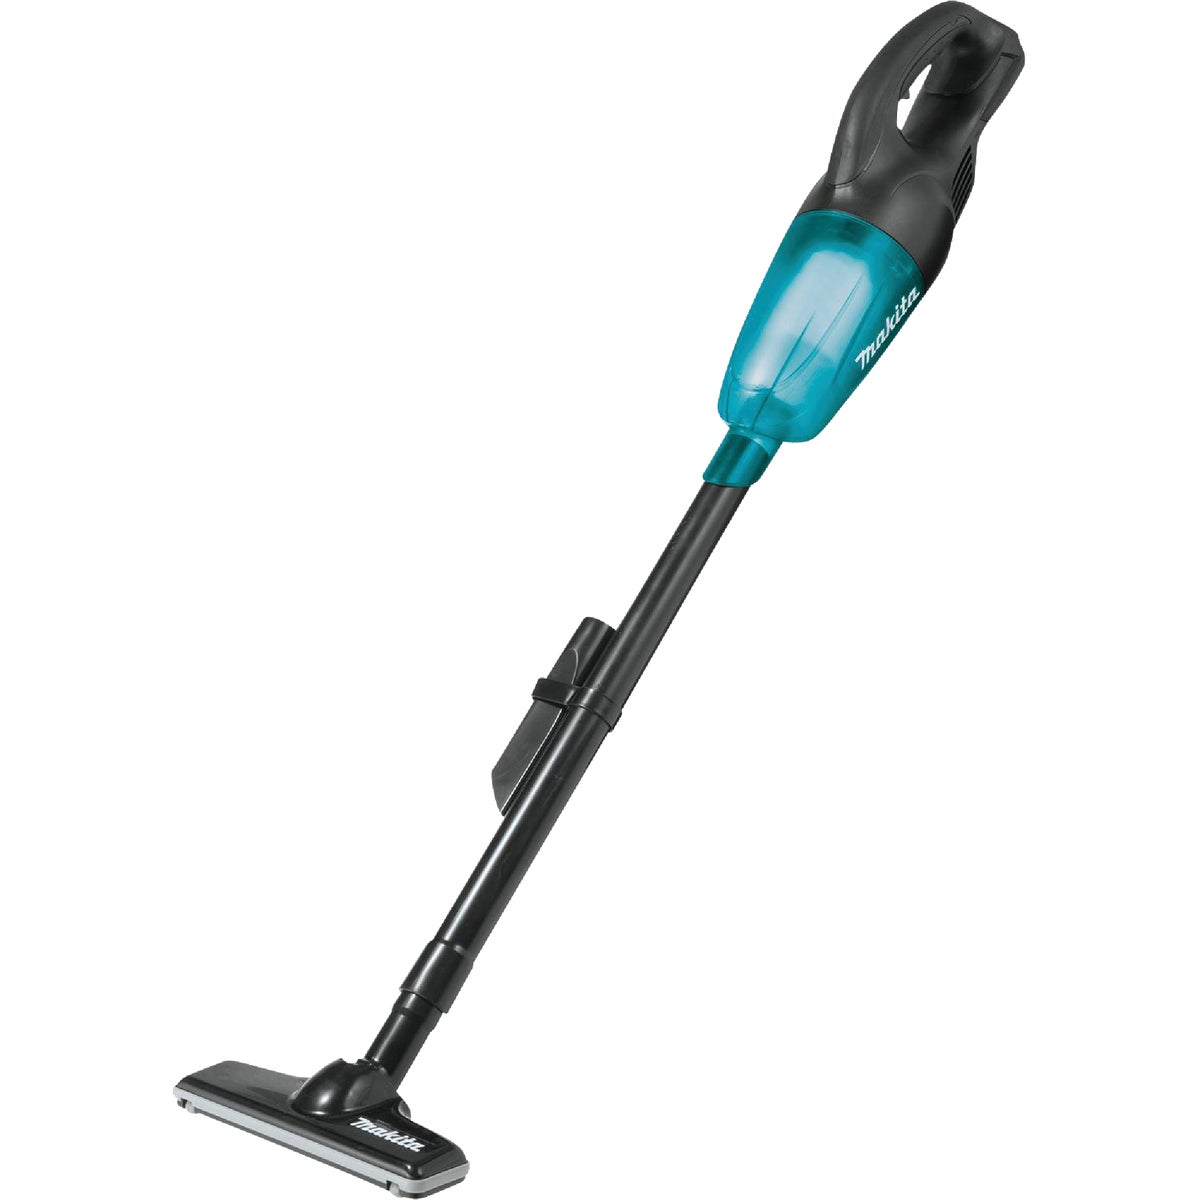 Makita 18 Volt LXT Cordless Bagless Compact Stick Vacuum Cleaner, Black (Tool Only)